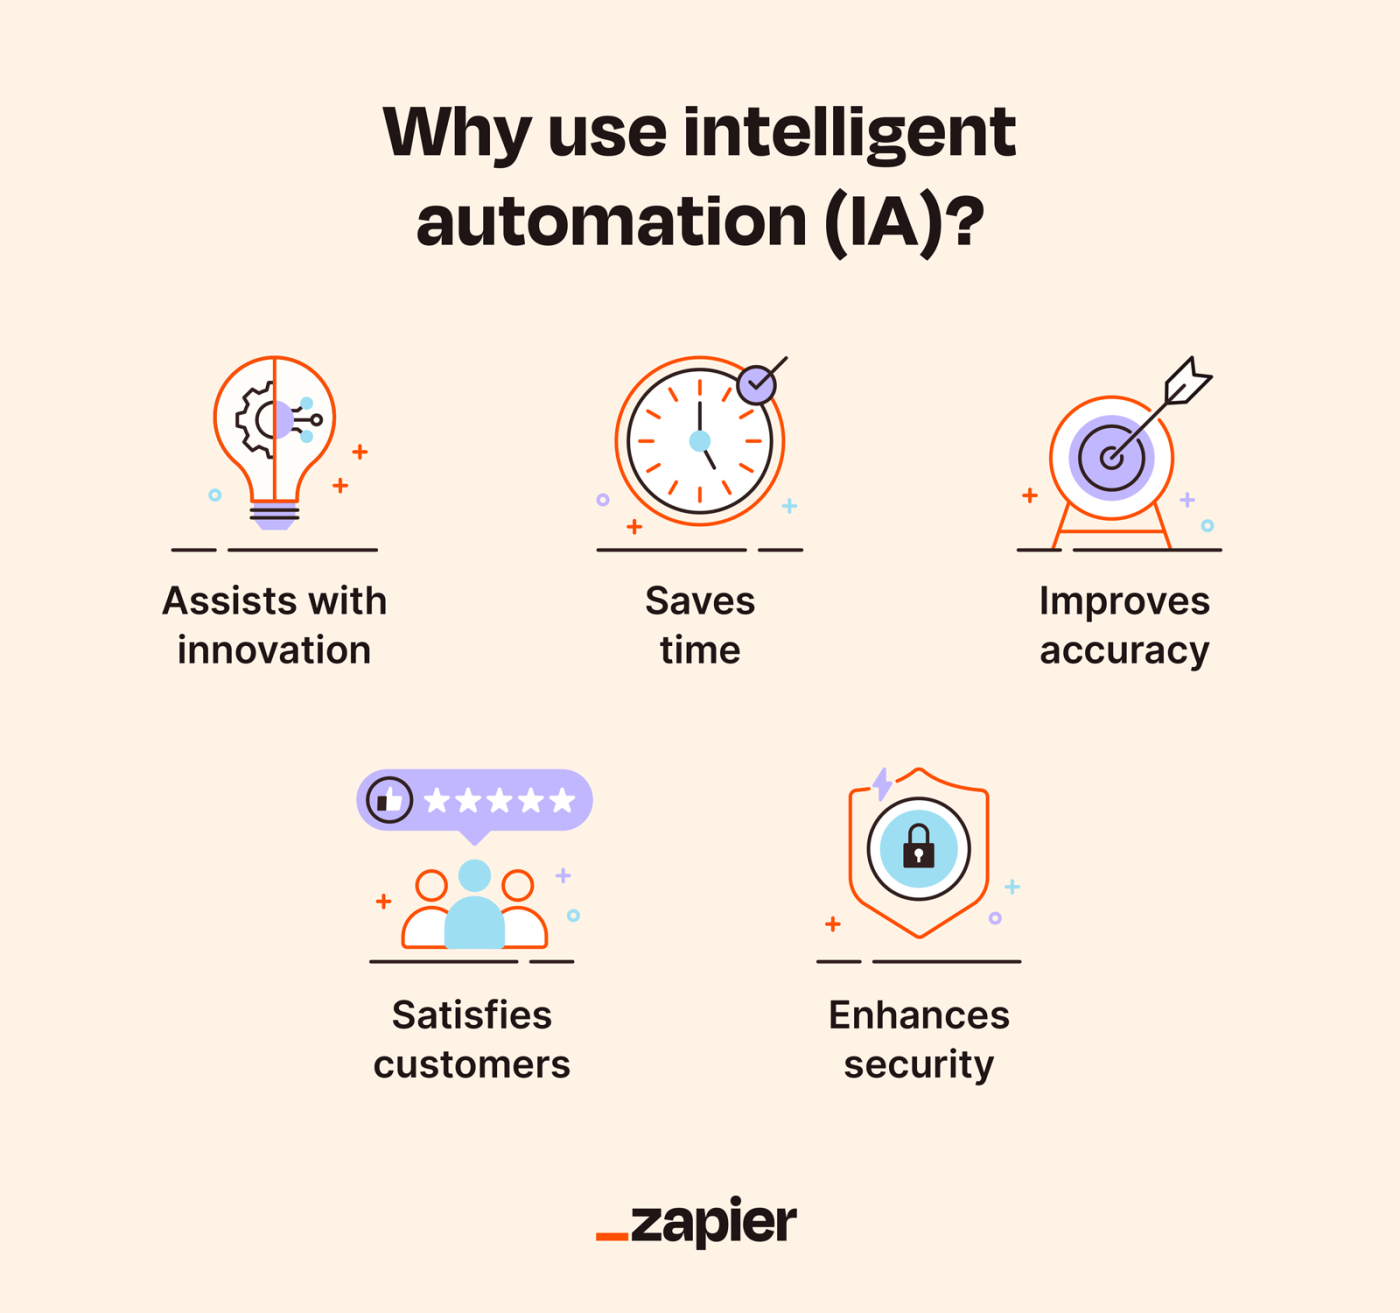 Illustrations depicting the benefits of using intelligent automation.